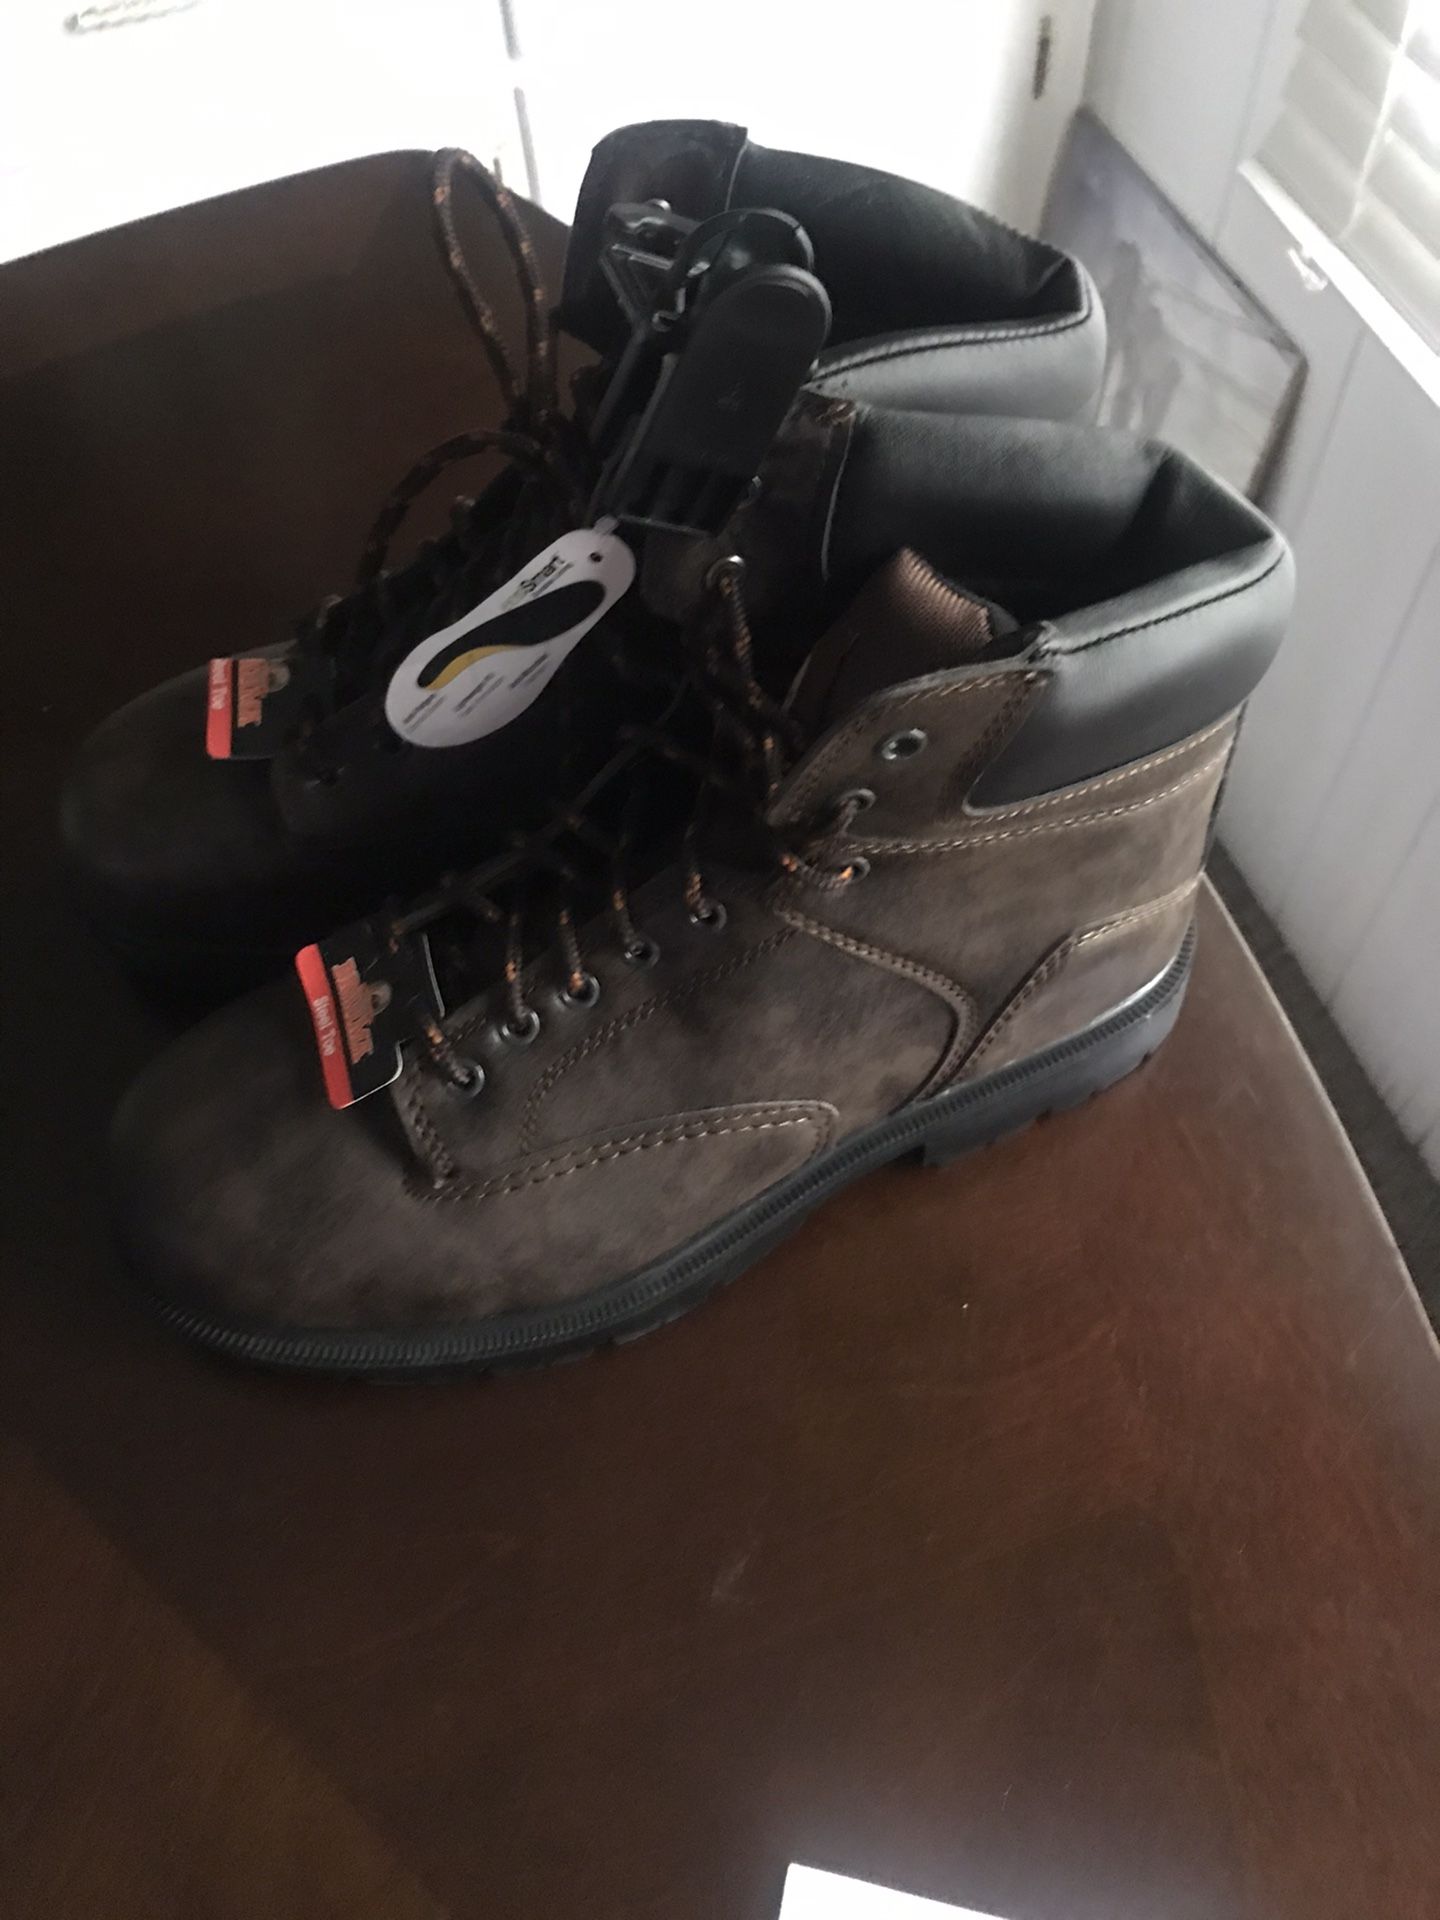 BRAND NEW SIZE (9) STEEL TOE WORK BOOTS - $30